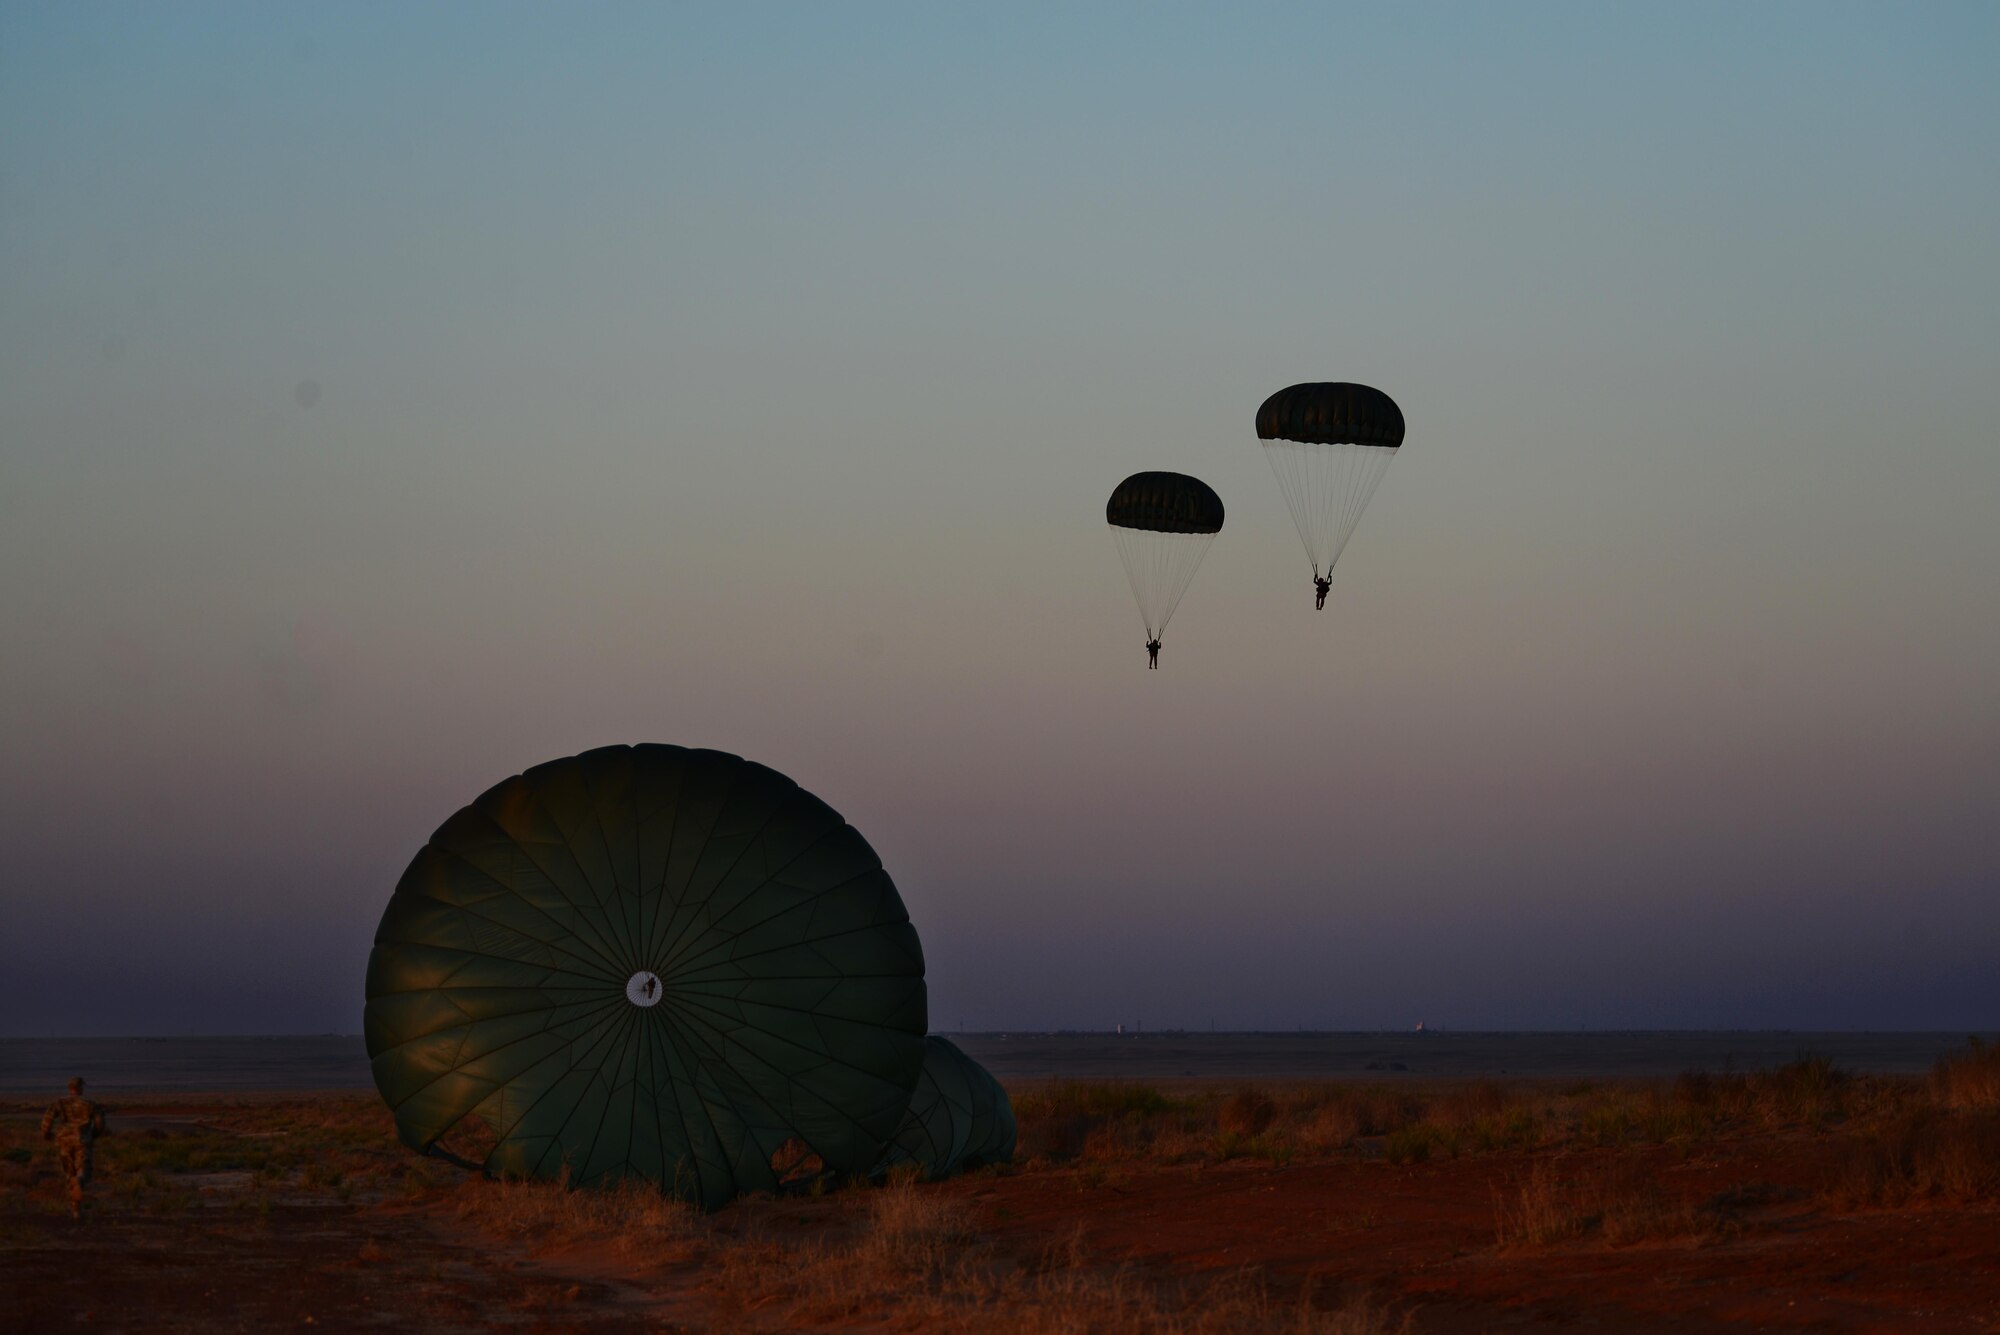 U.S. Army Soldiers from the 193rd Infantry Brigade and U.S. Air Force Airmen from the 26th Special Tactics Squadron land after a parachute jump as a part of Emerald Warrior April 28, 2015 at Melrose Air Force Range, N.M. Emerald Warrior is the Department of Defense’s only irregular warfare exercise, allowing joint and combined partners to train together and prepare for real world contingency operations. (U.S. Air Force Photo/Airman 1st Class Shelby Kay-Fantozzi)